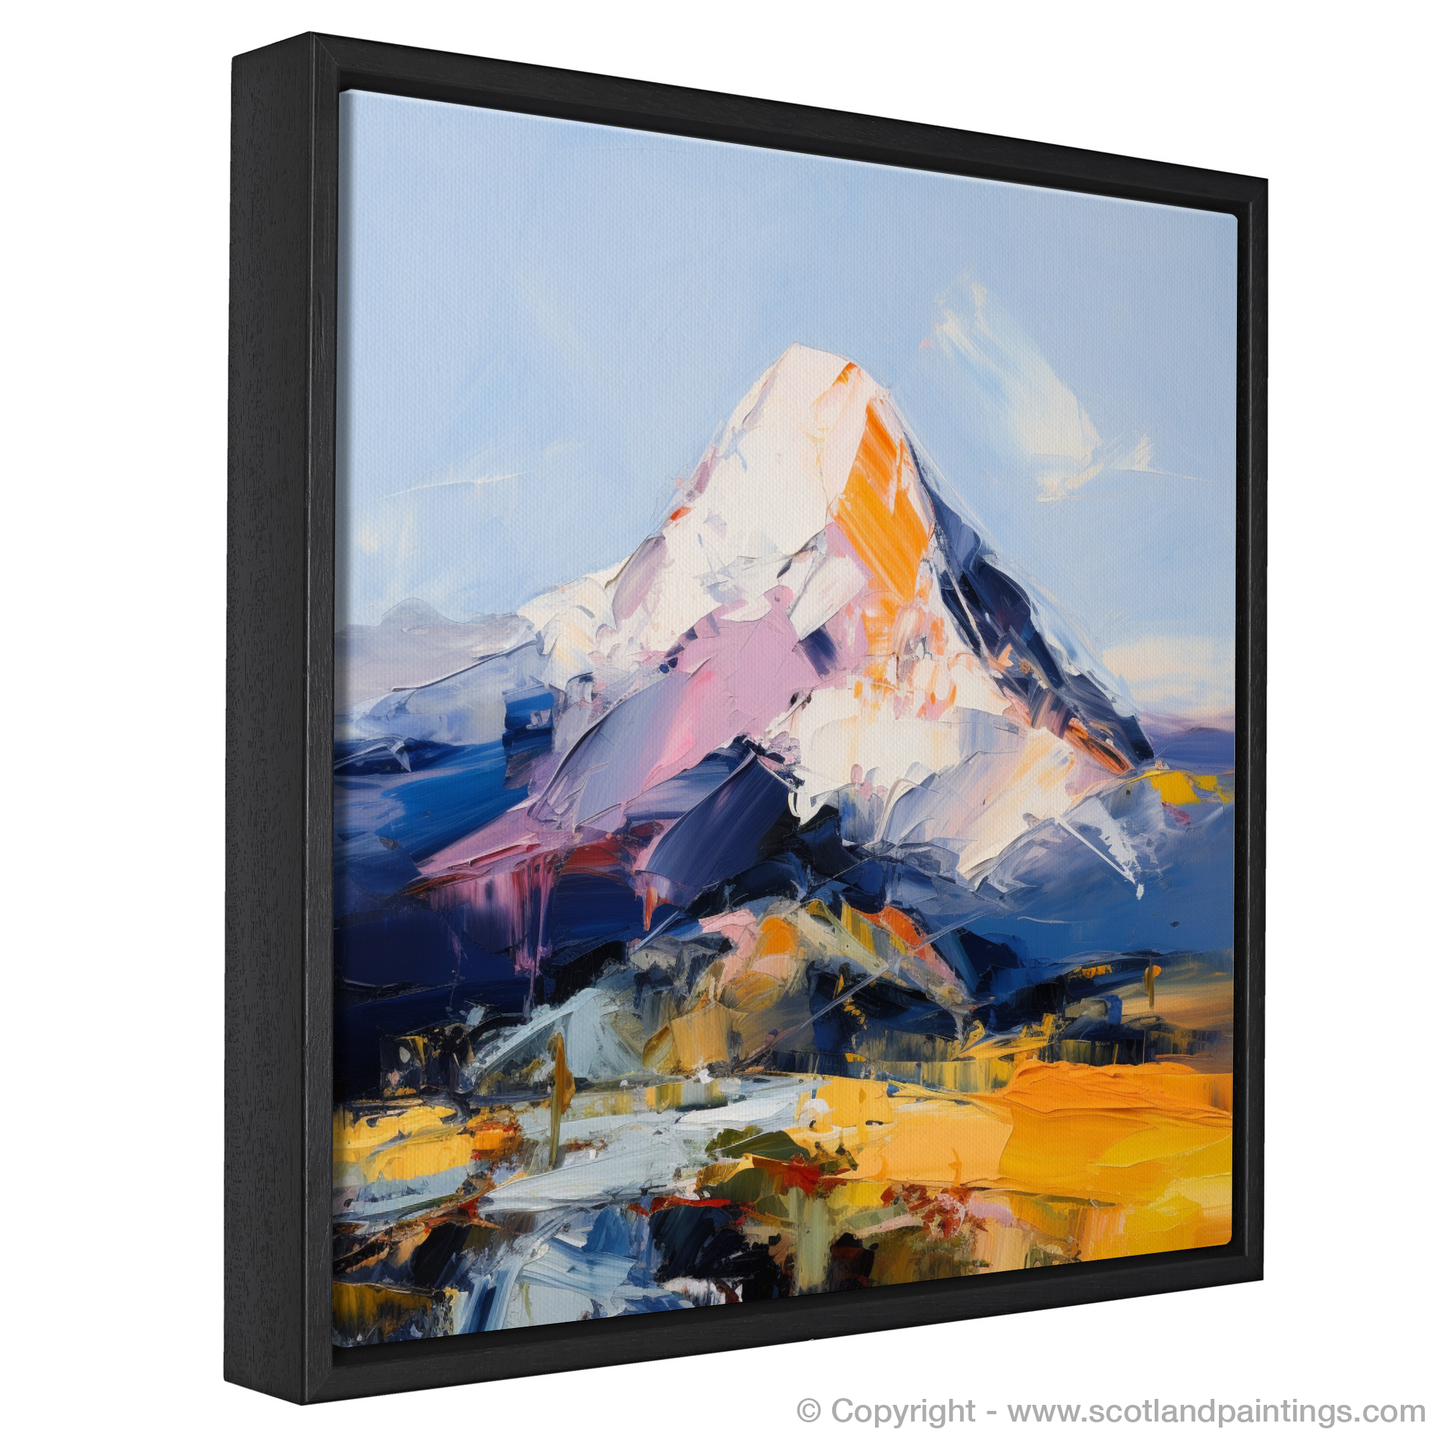 Painting and Art Print of Mount Keen entitled "Mount Keen Majesty: An Expressionist Ode to Scotland's Wild Terrain".